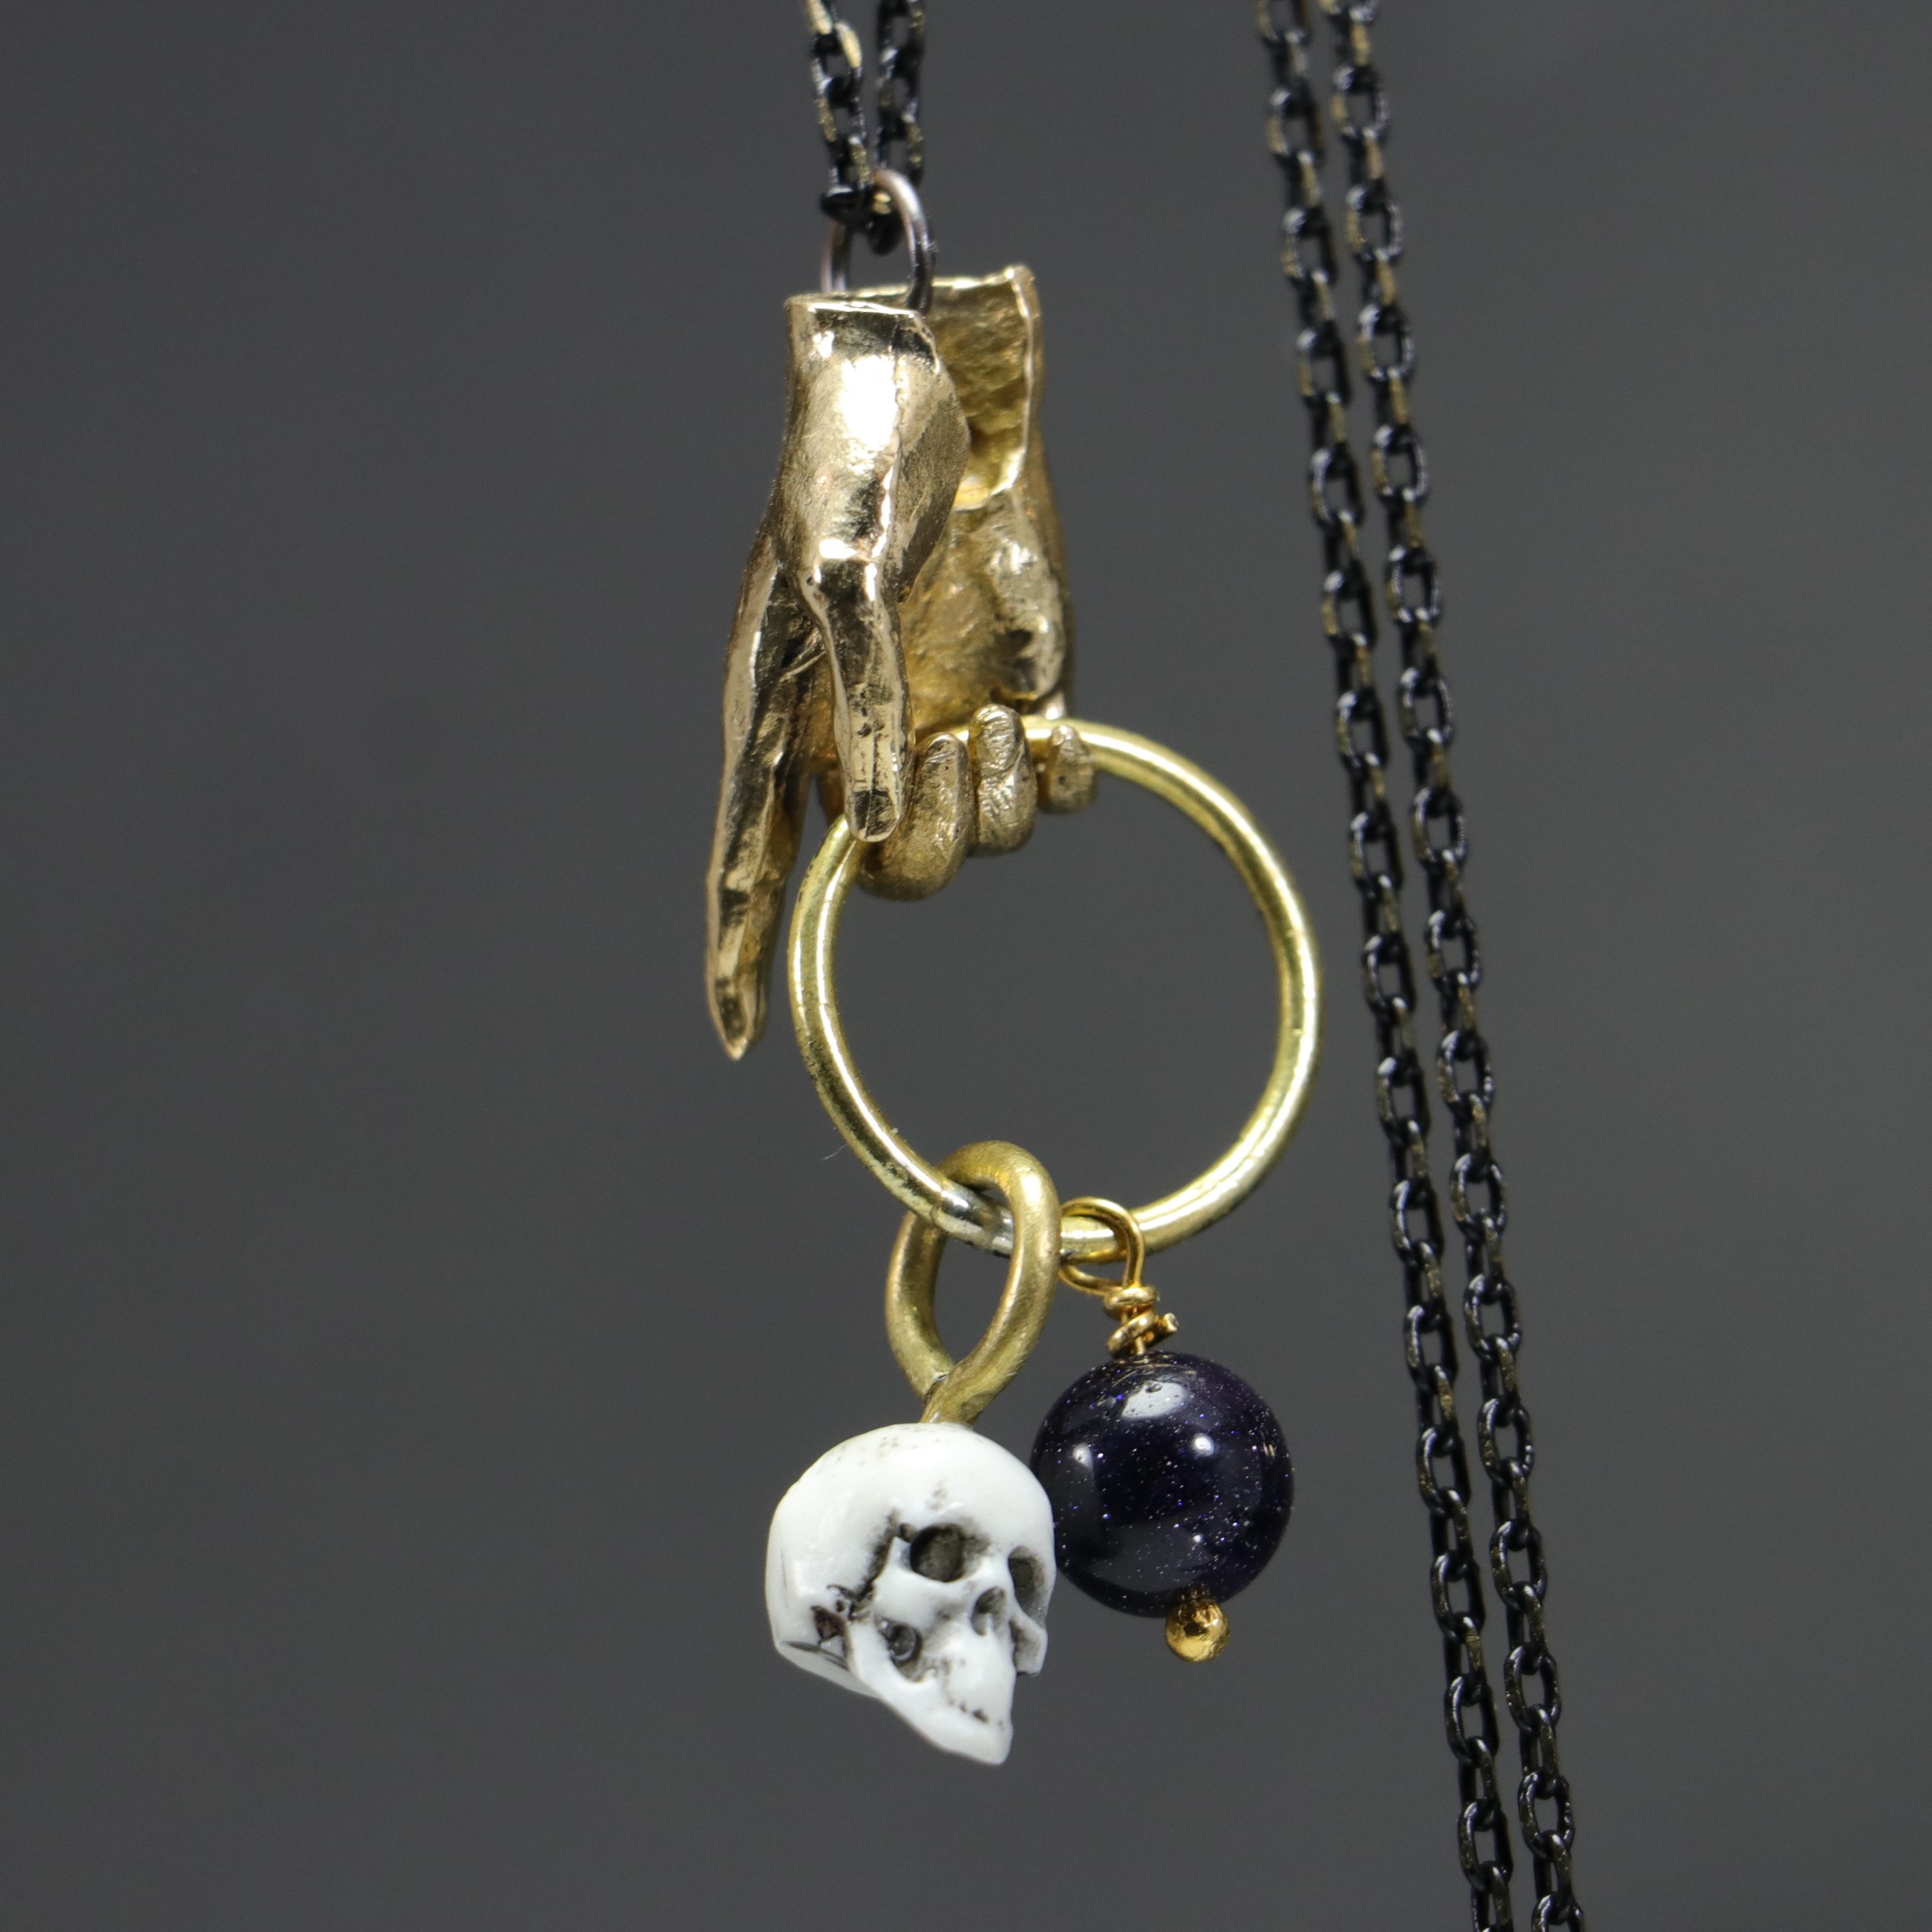 Hand and Skull Star Stone Necklace